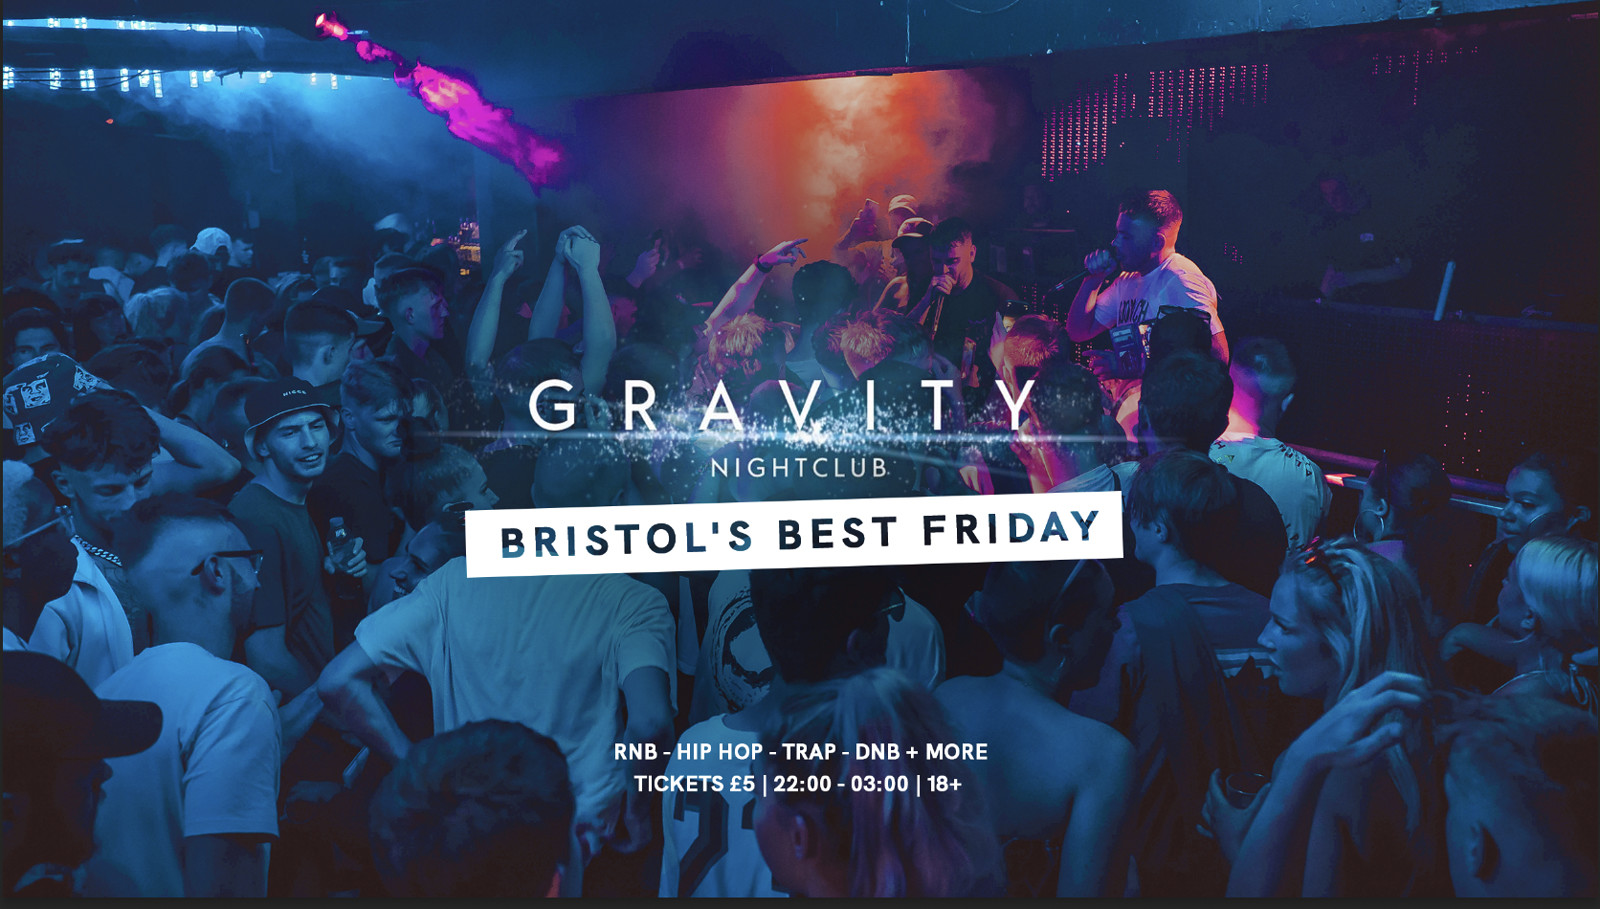 Don't Tell Mum: BRISTOL FREE PARTY at Gravity